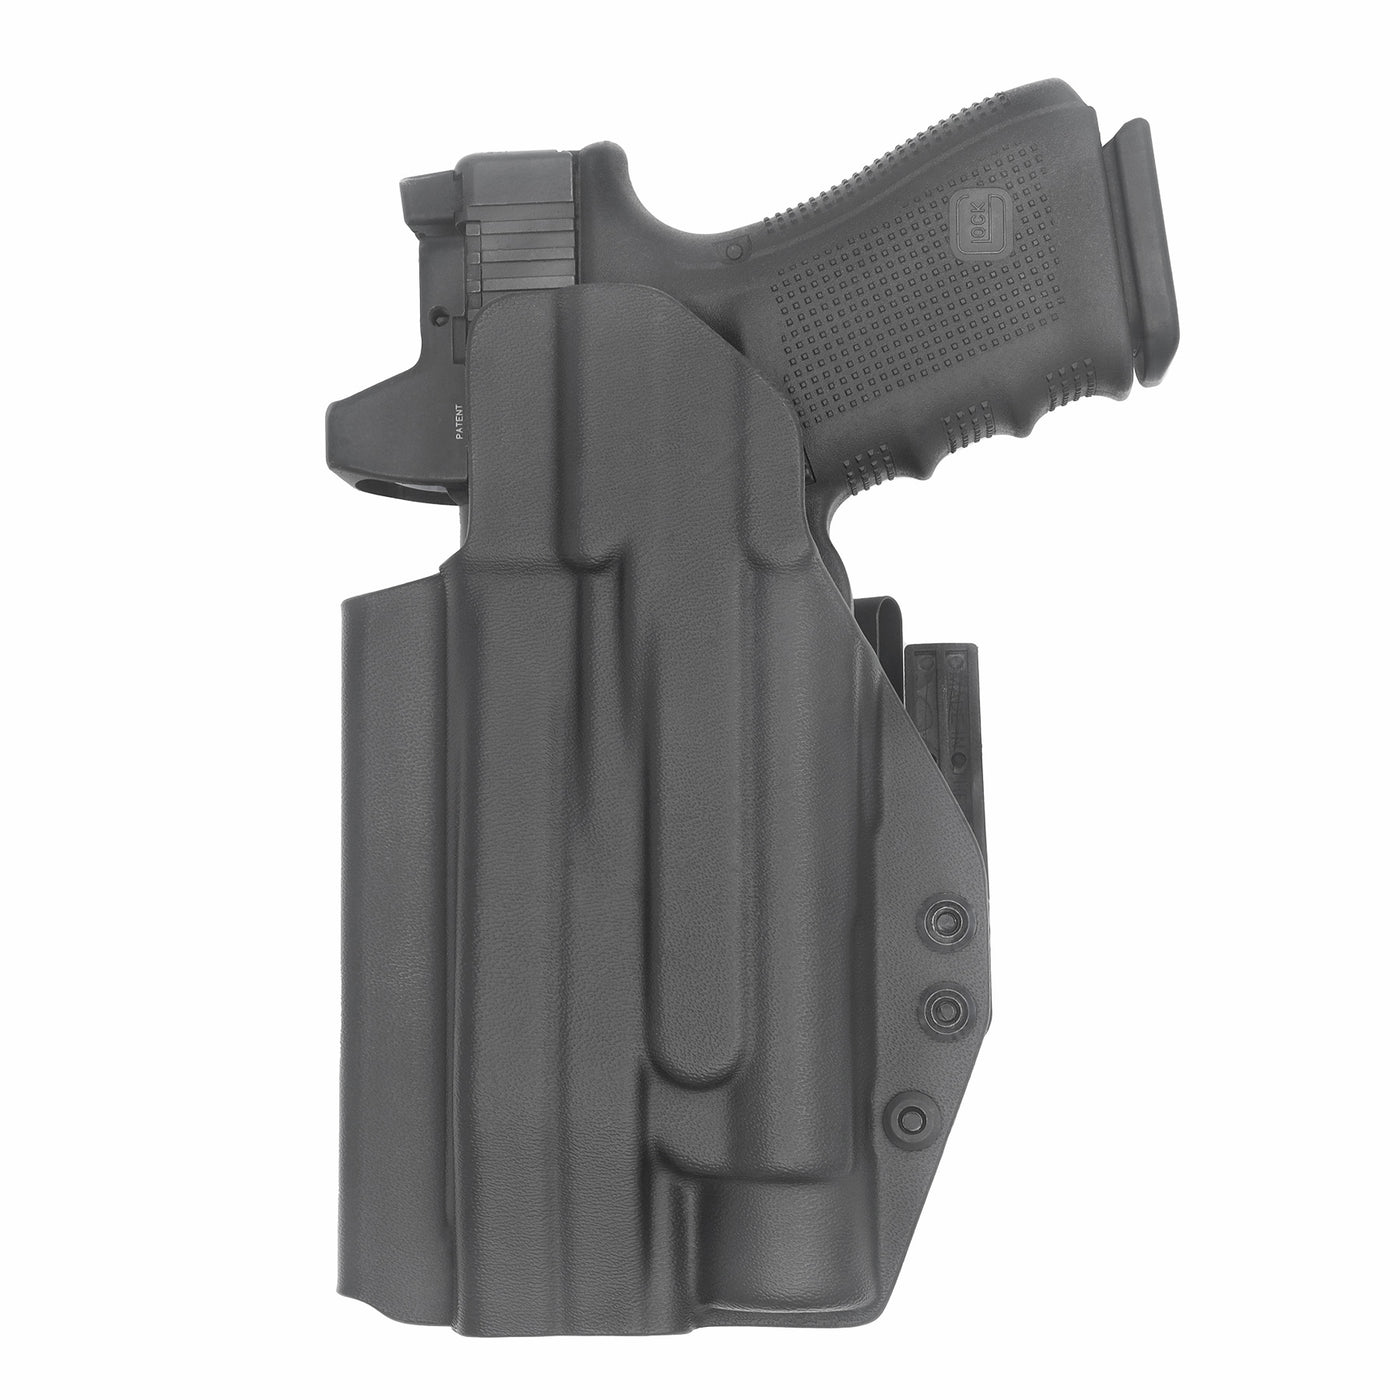 C&G Holsters Custom IWB ALPHA UPGRADE Tactical Glock Streamlight TLR1/HL in holstered position back view